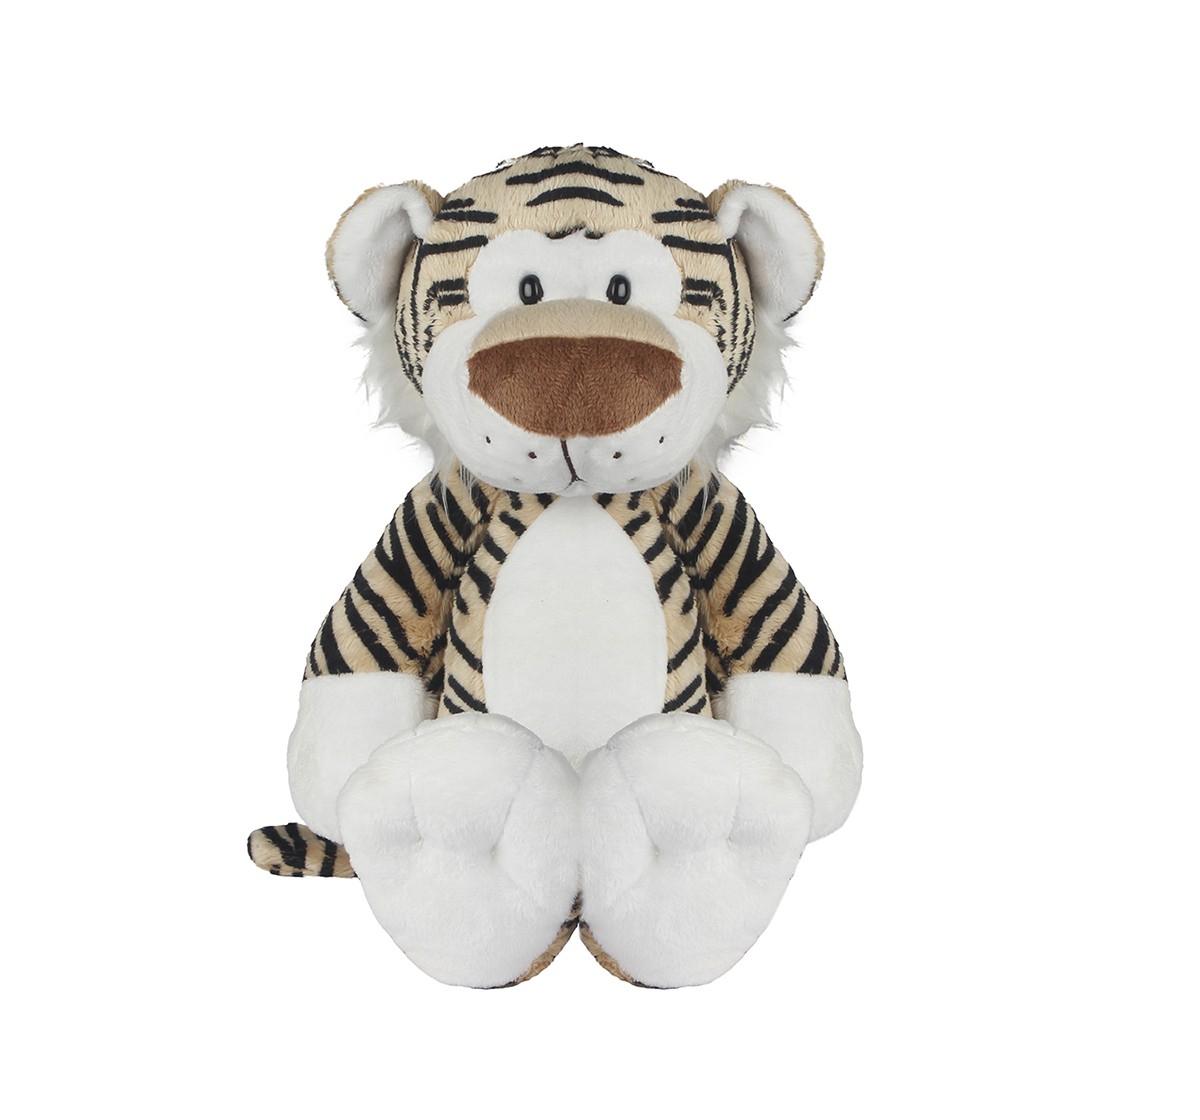  Hamleys Quirky Tiger Soft Toy (Yellow/Black)  for Kids age 2Y+ - 11 Cm 